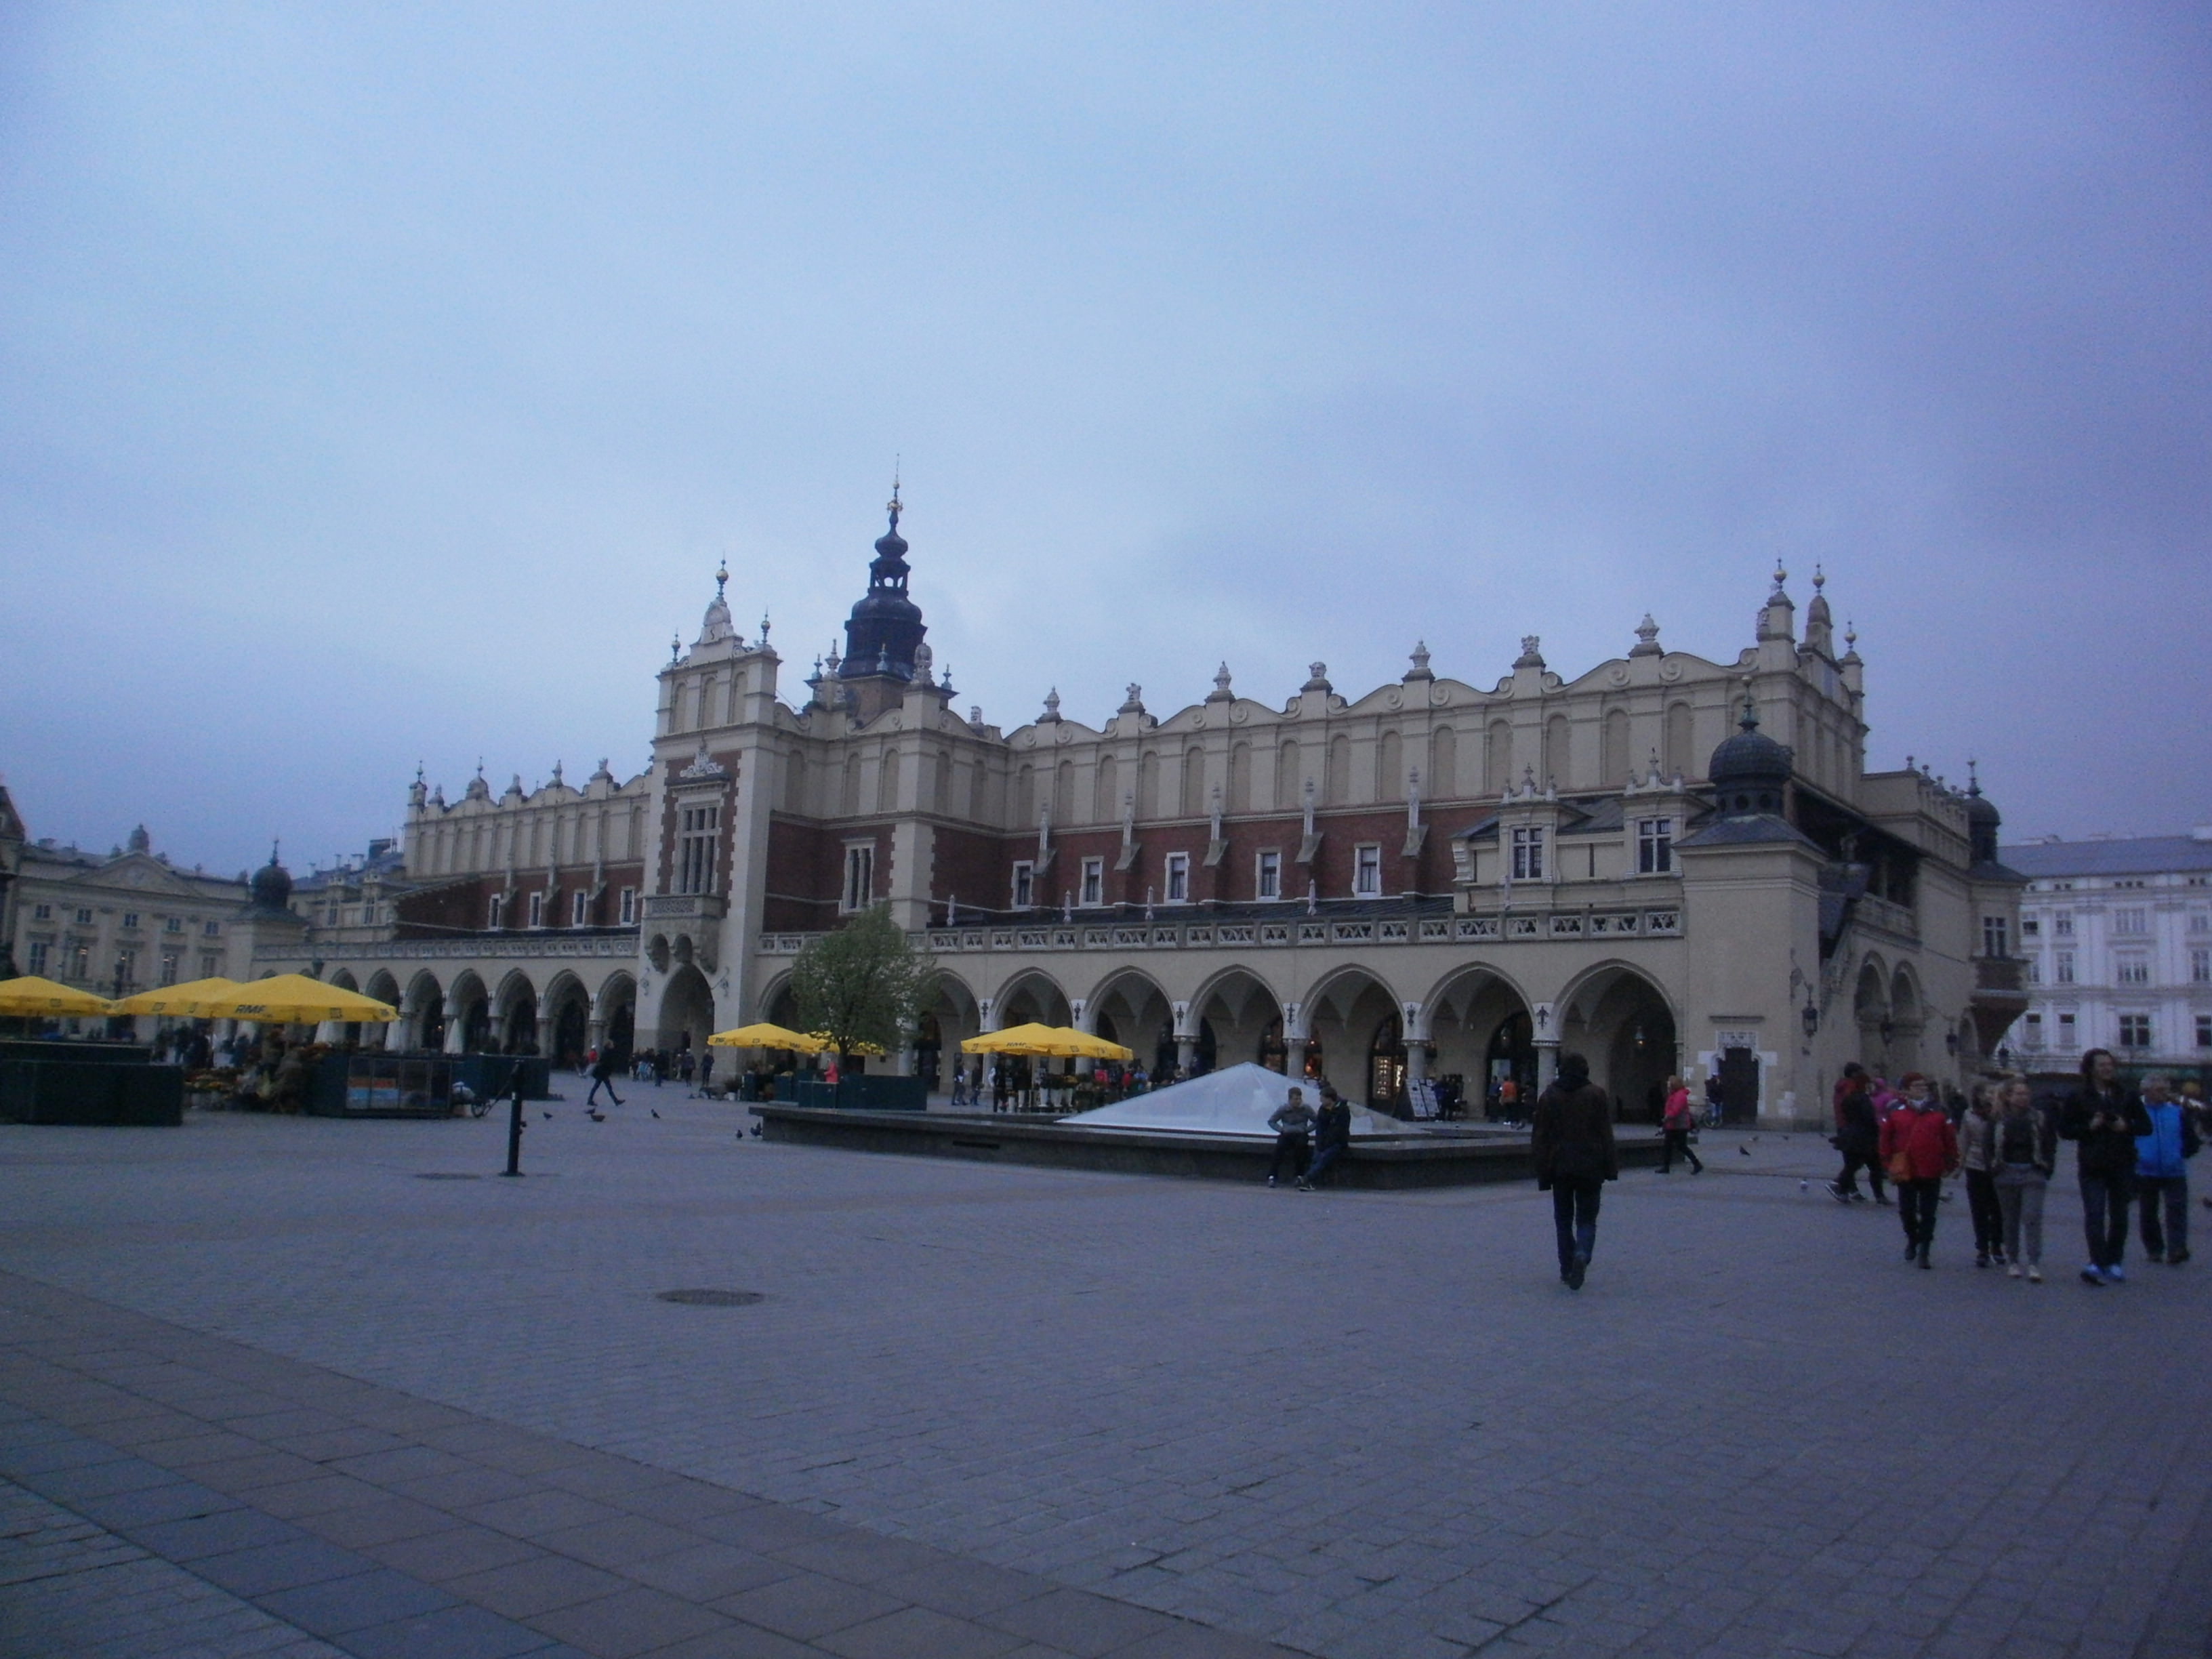 CRACOW - MAIN SQUARE